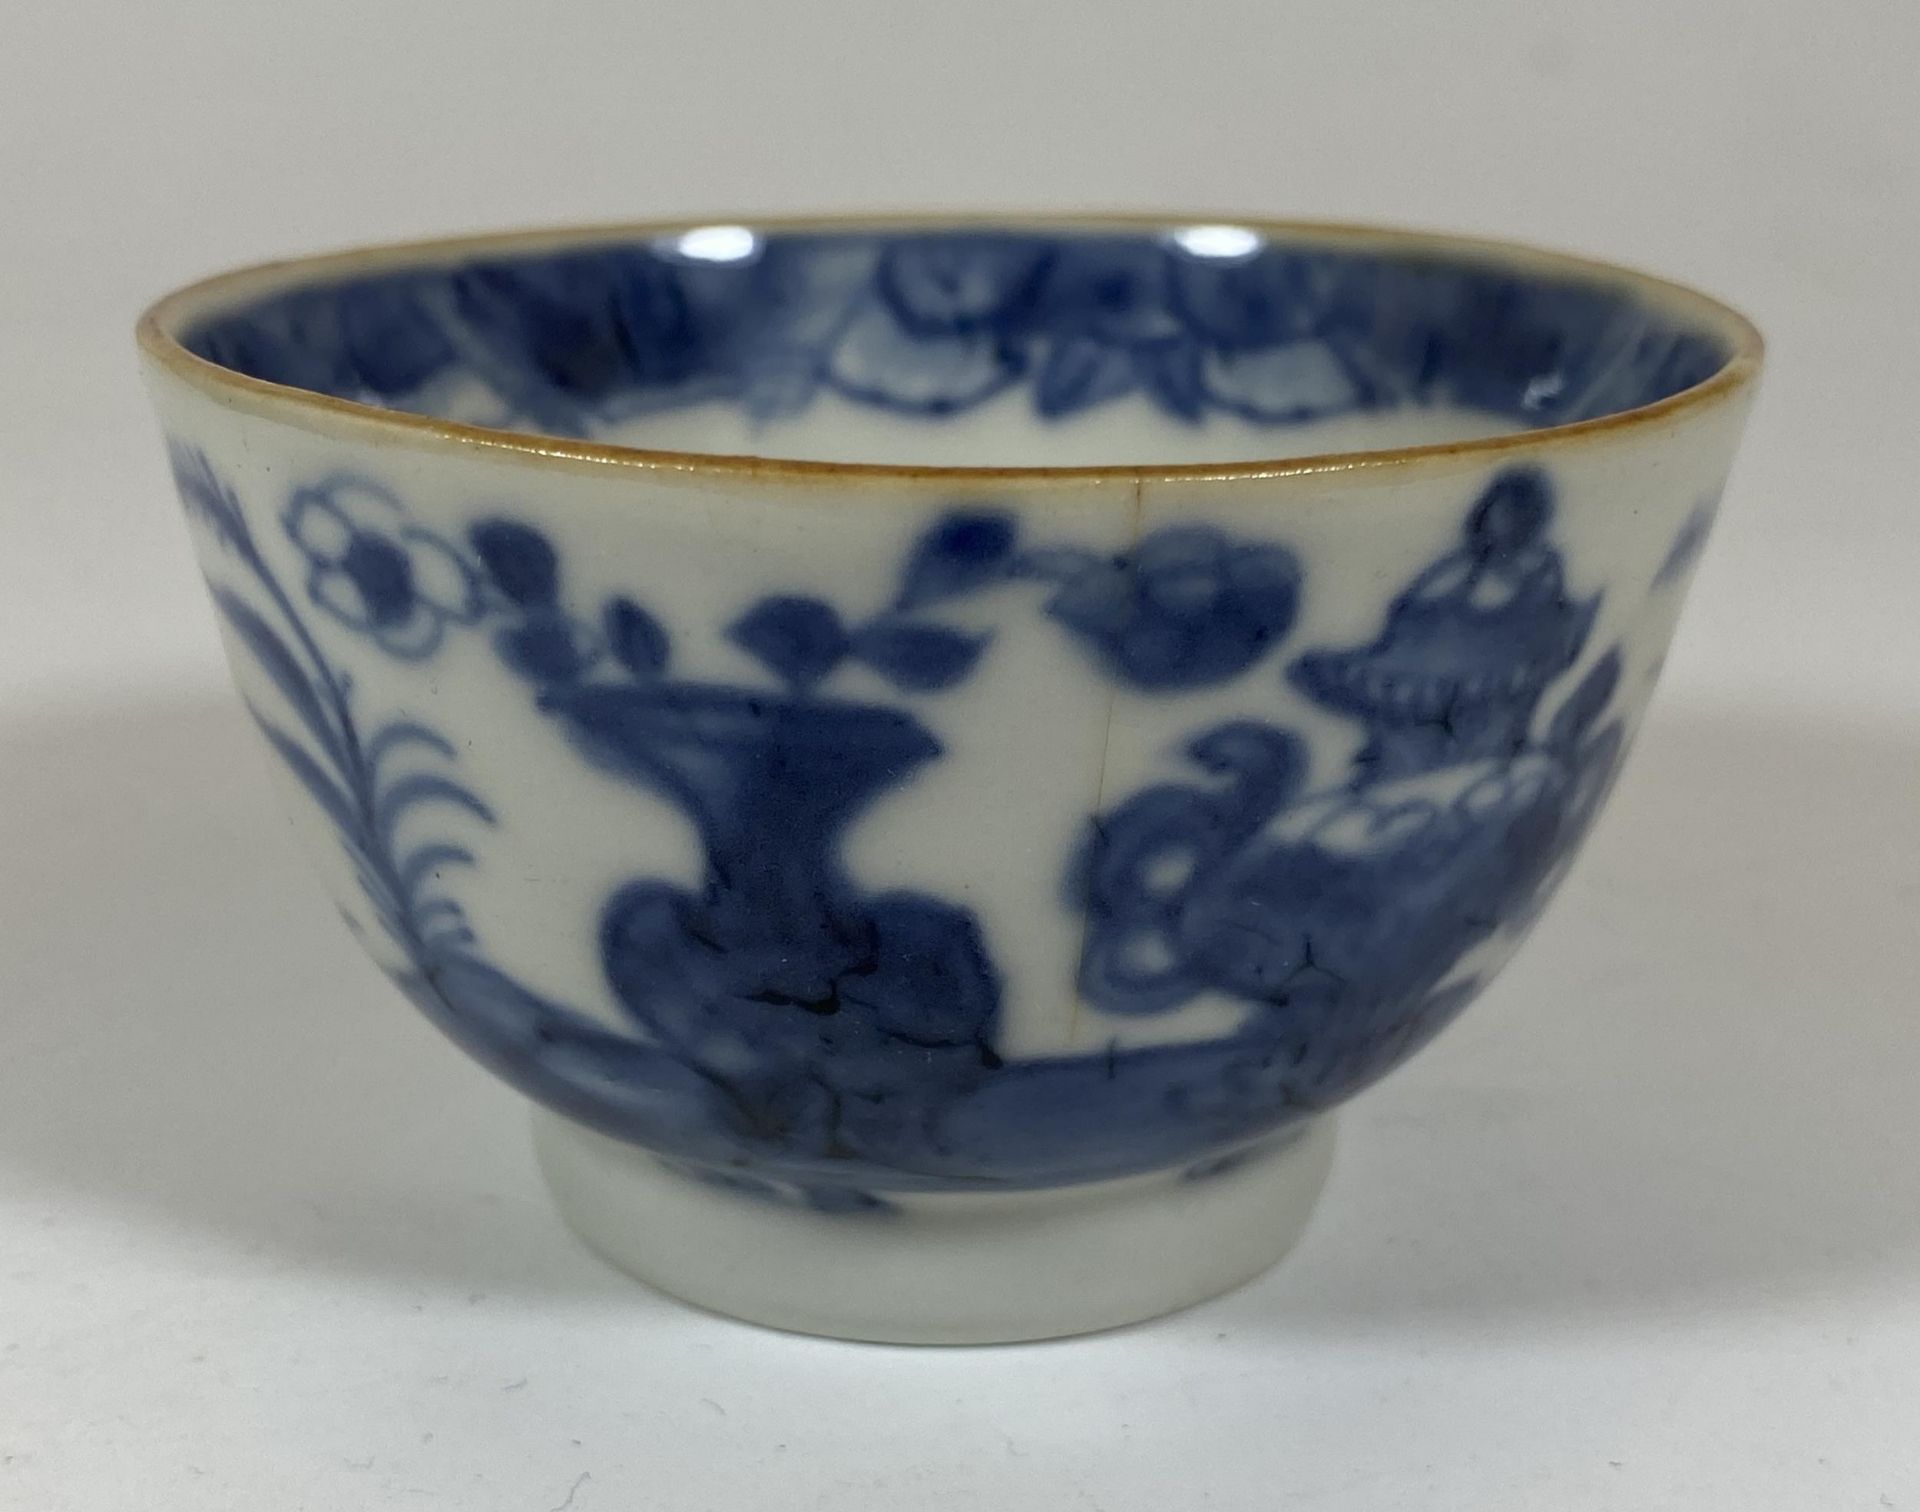 A 19TH CENTURY QING CHINESE BLUE AND WHITE PORCELAIN TEA BOWL, HEIGHT 4.5CM